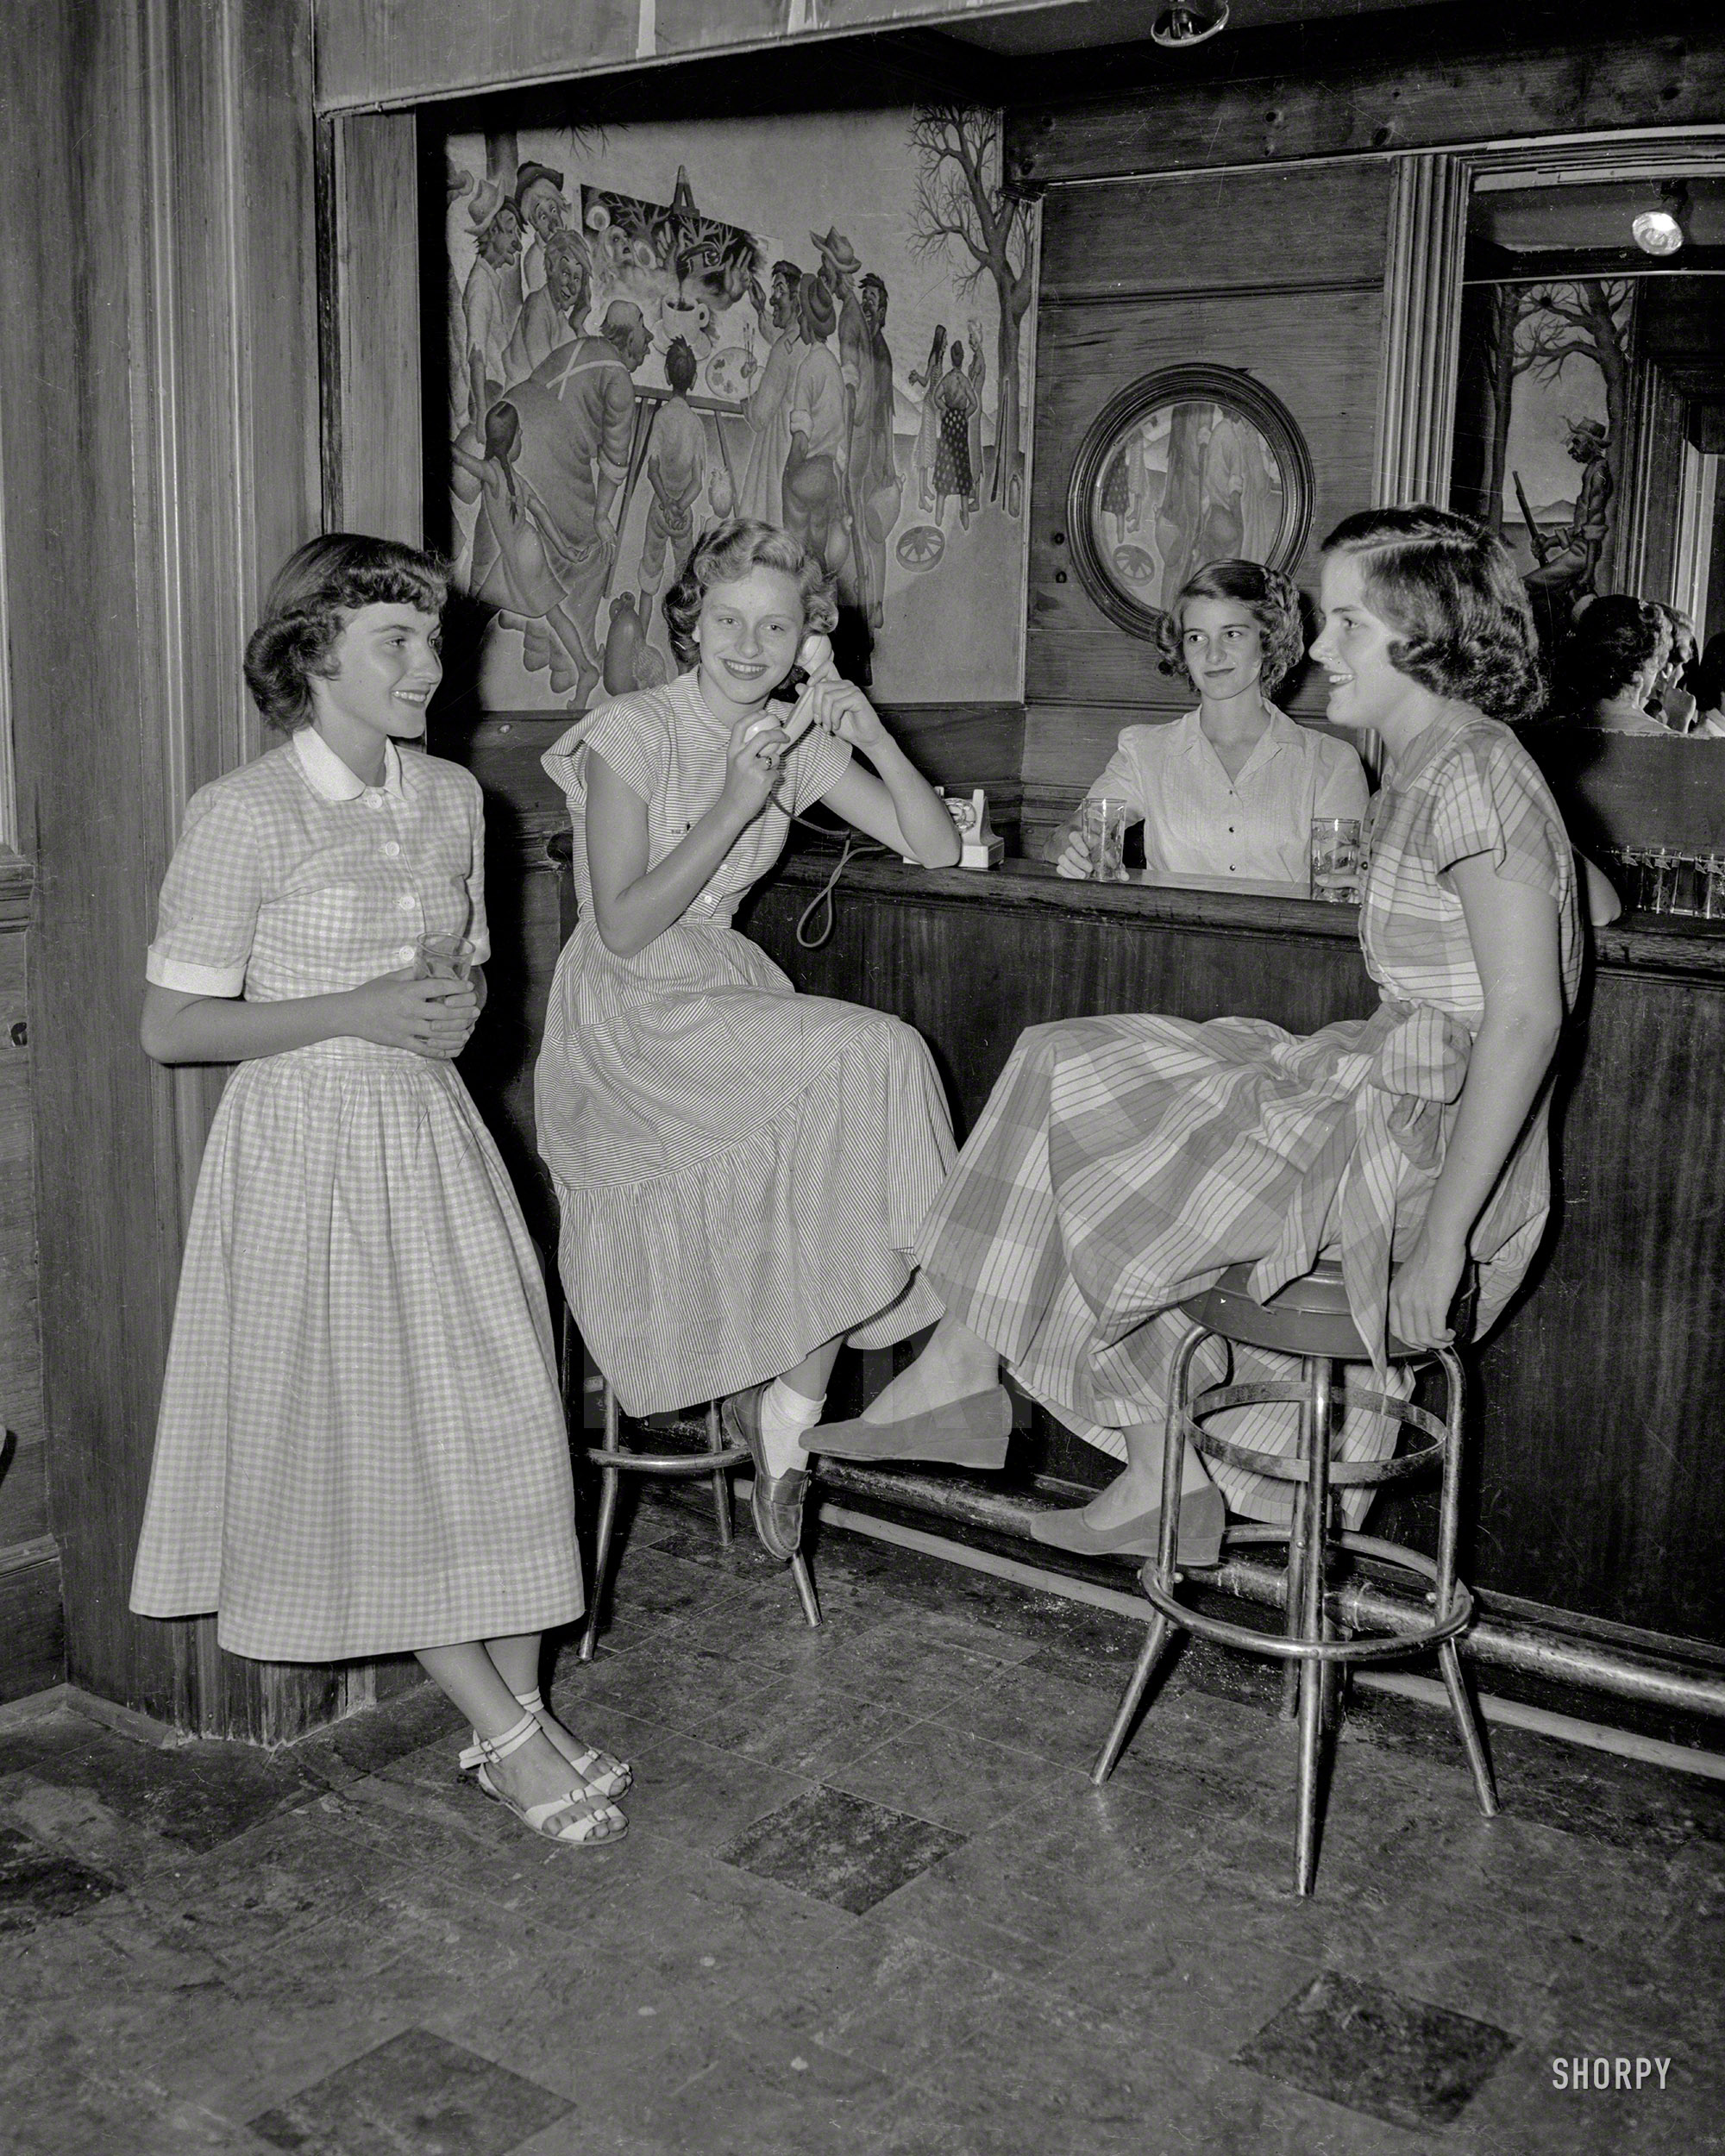 Georgia circa 1956, and some Junior League types at a country-clubby looking bar with an unusual picture-in-picture mural. The tumblers say "Auburn." 4x5 acetate negative from the News Photo Archive. View full size.